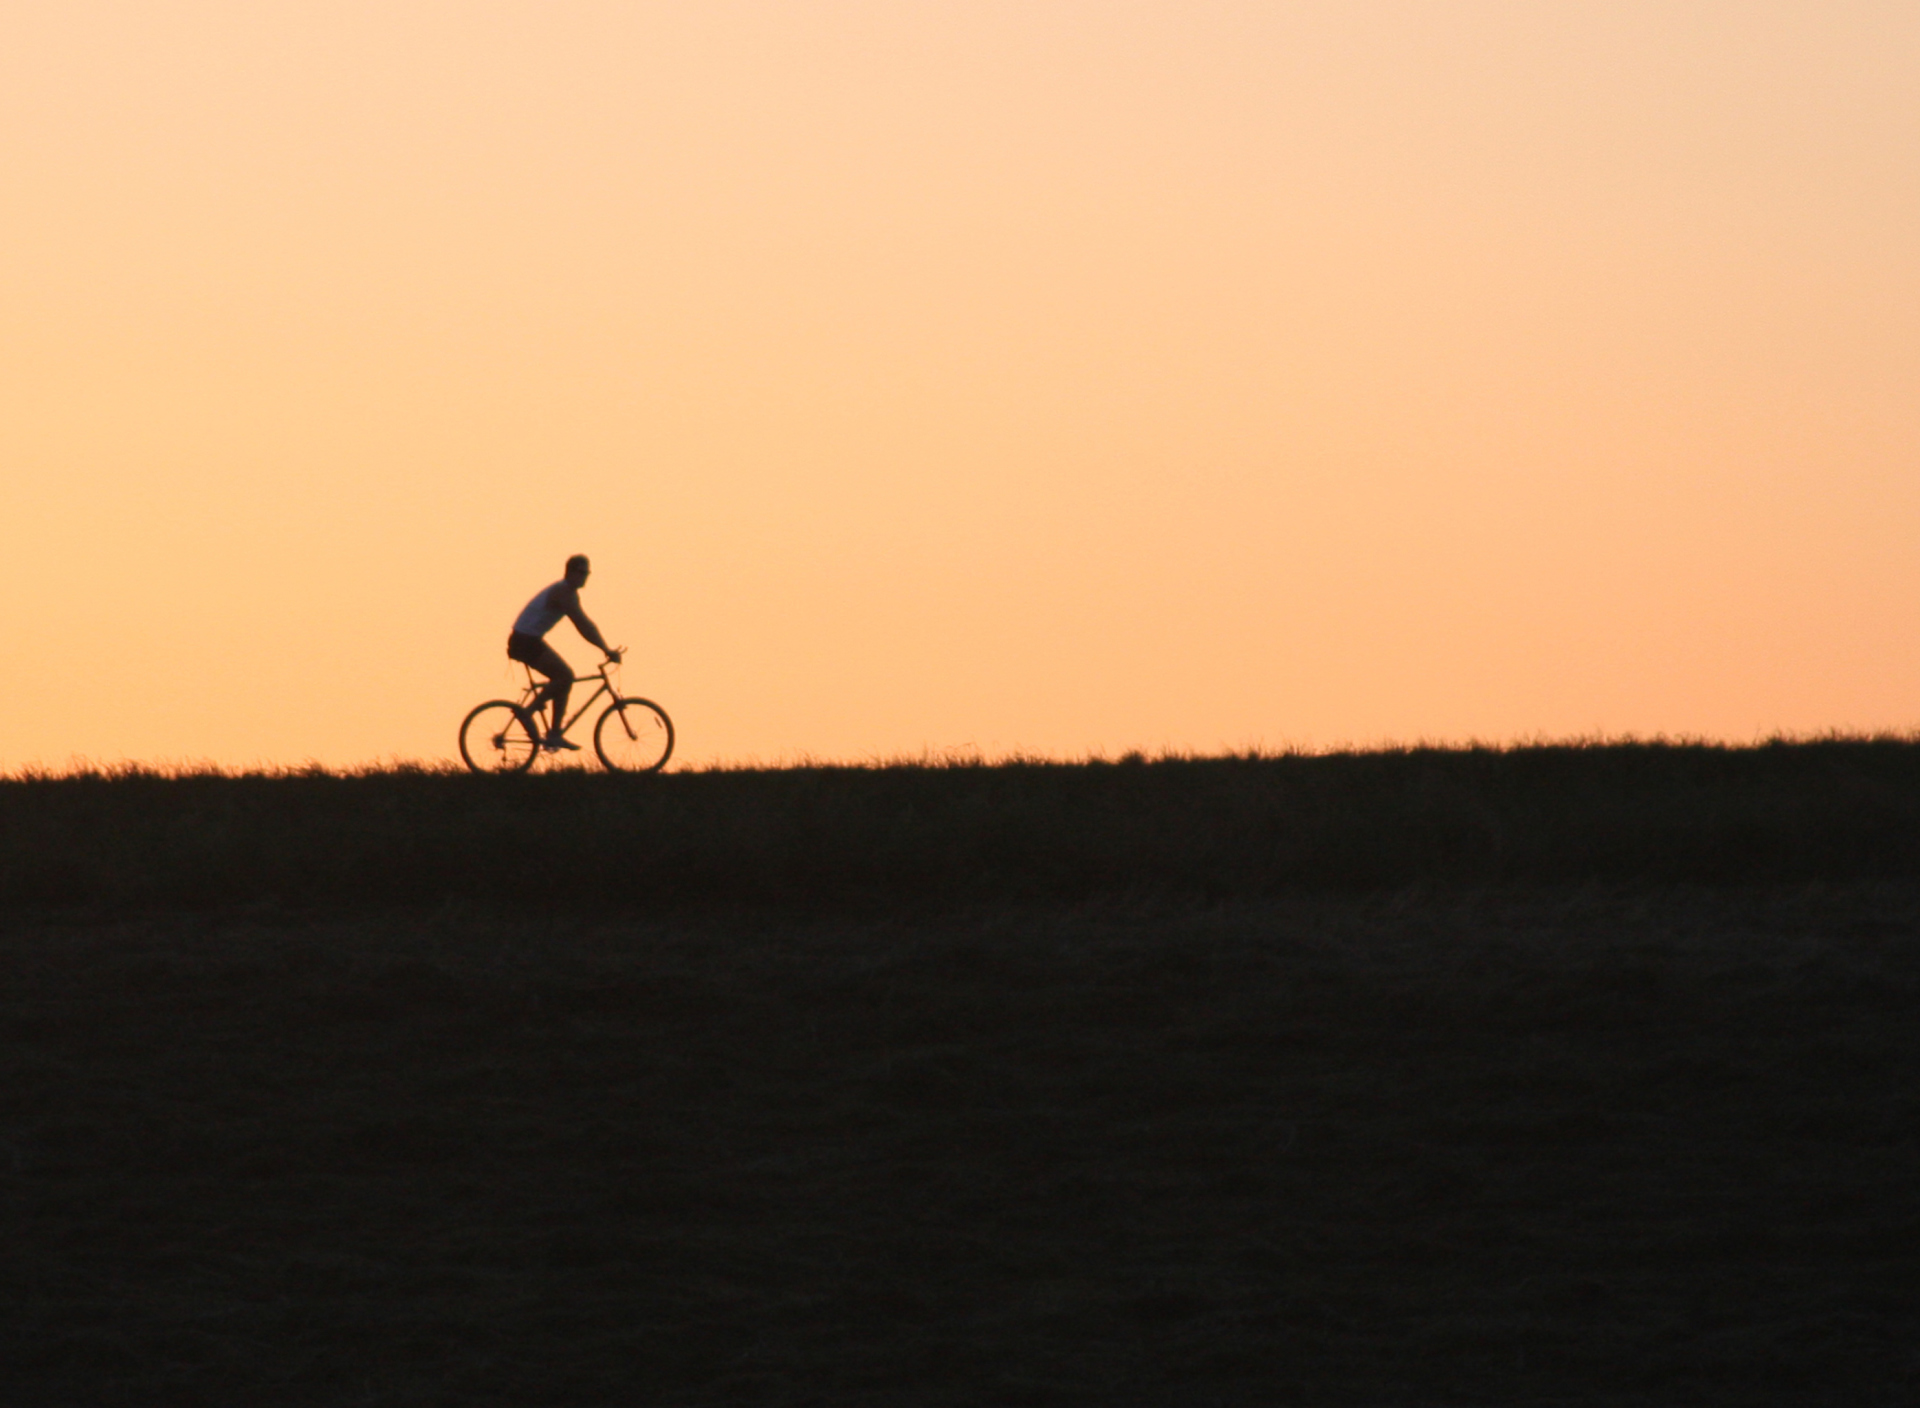 Bicycle Ride In Field wallpaper 1920x1408